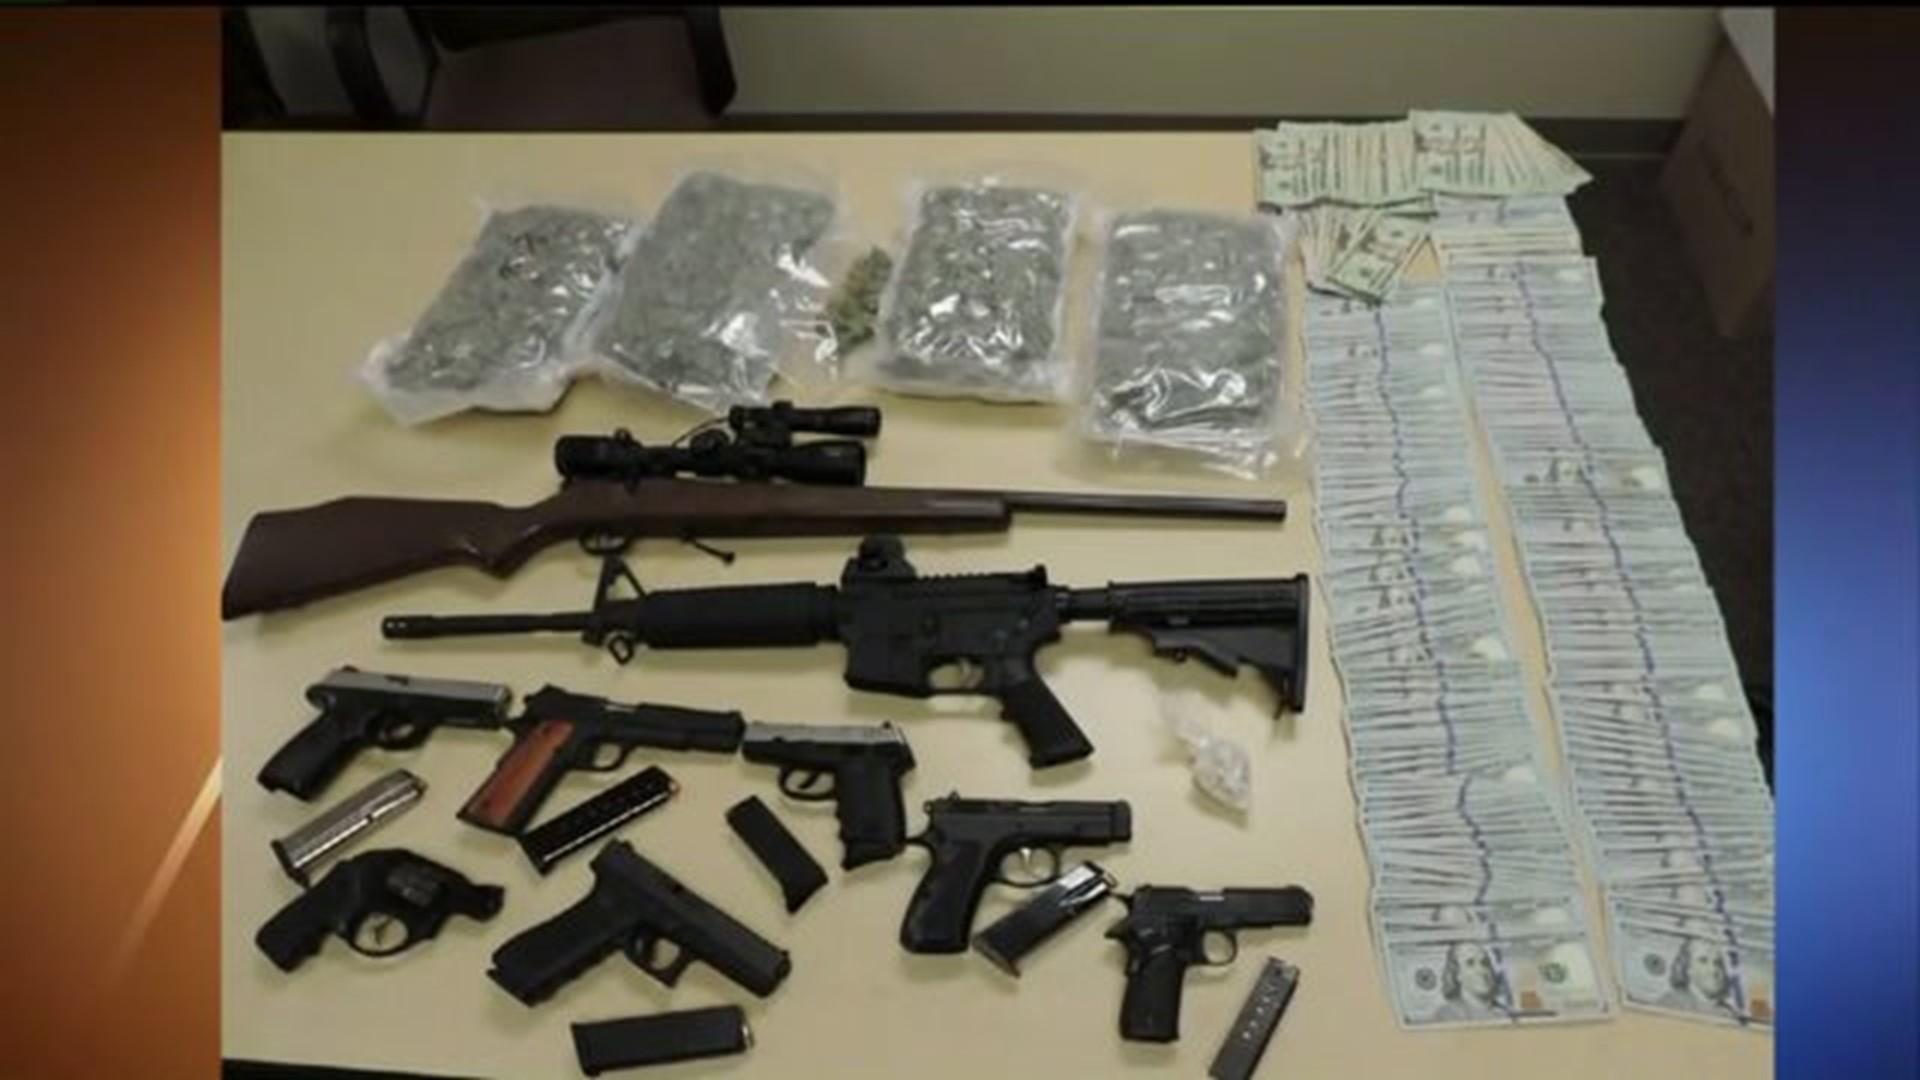 Three Nabbed after Rap Video Featuring Drugs, Guns, Cash